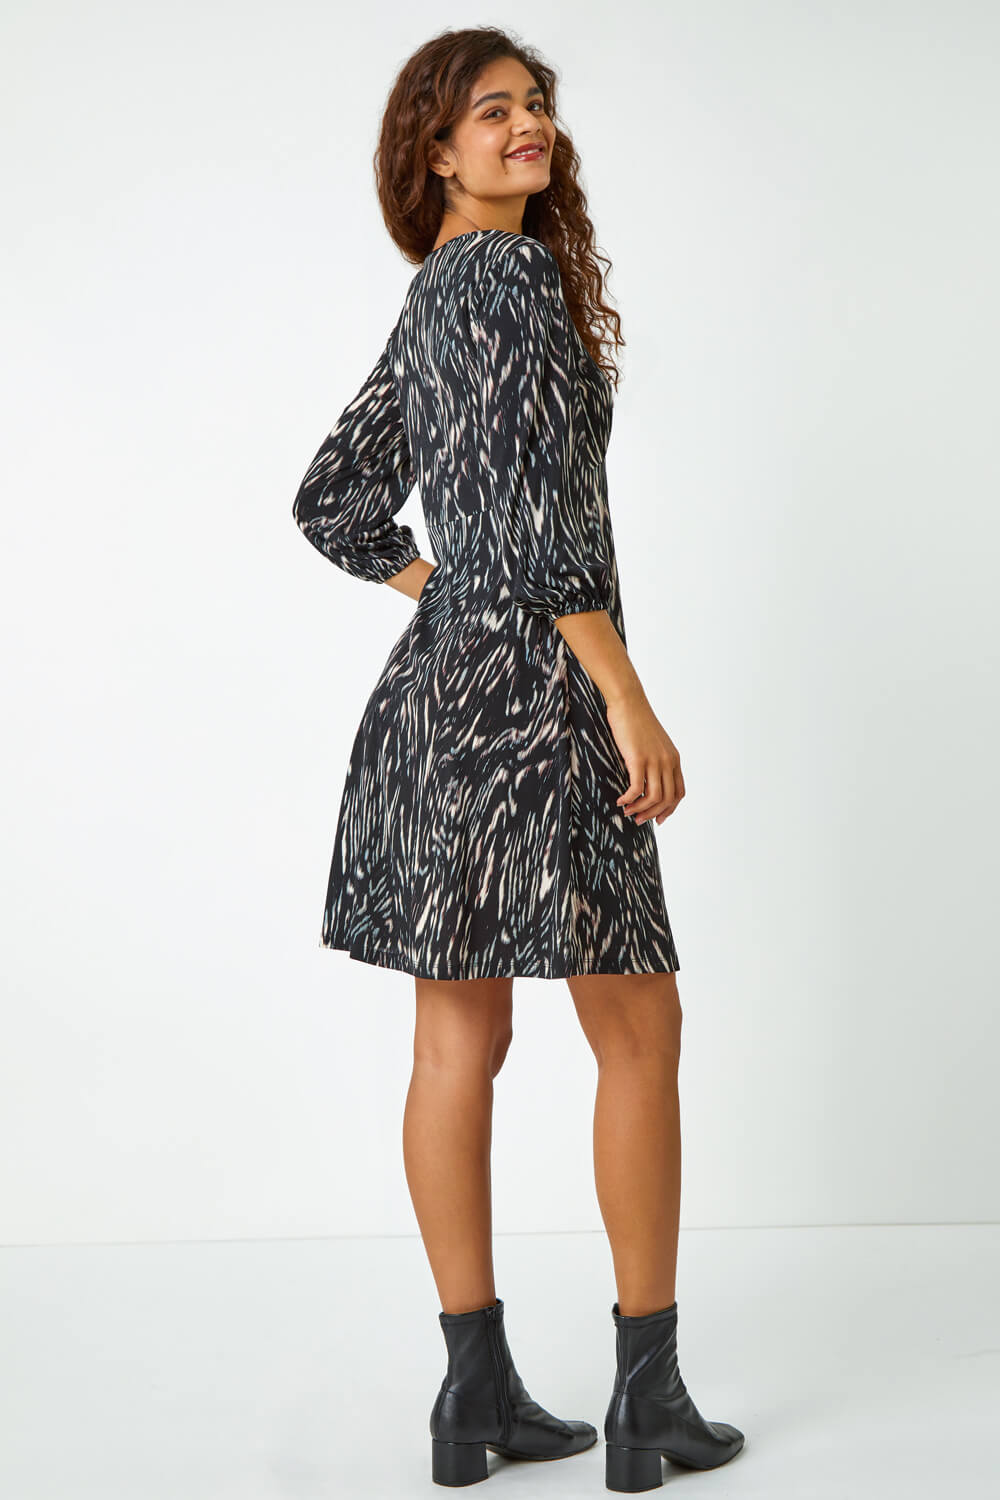 Black Abstract Print Stretch Swing Dress, Image 3 of 5